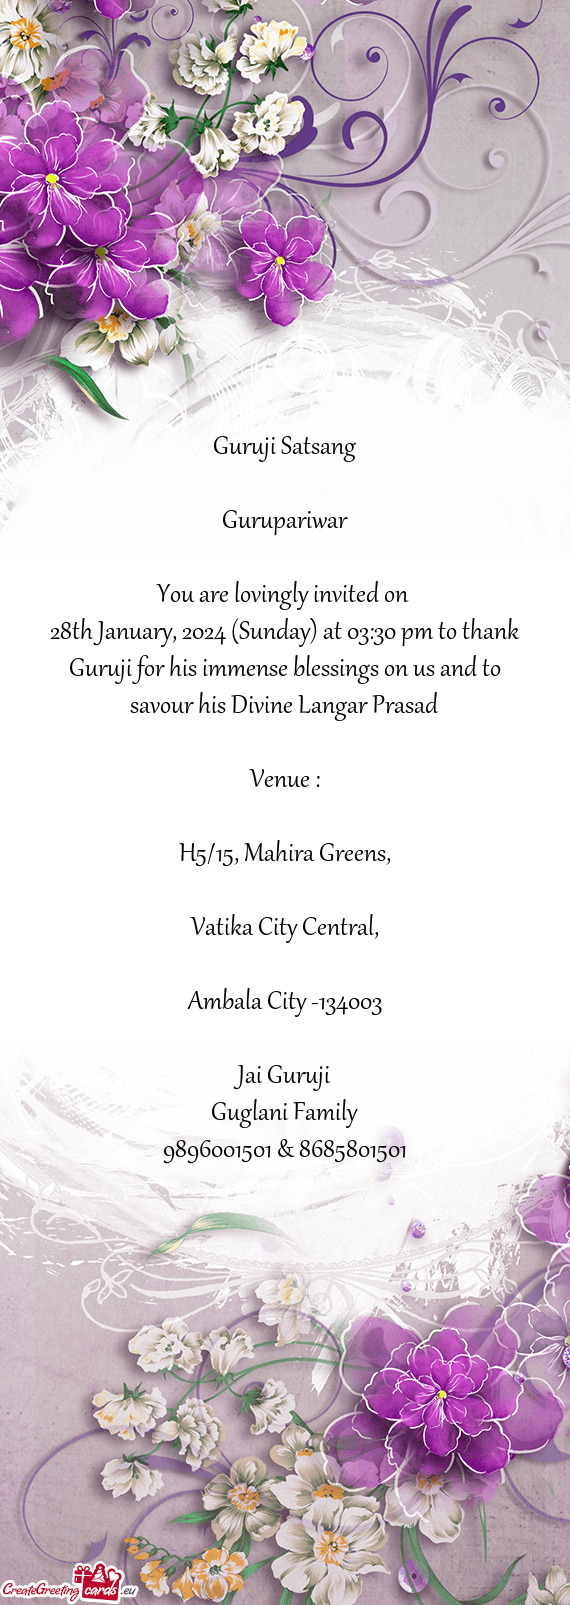 28th January, 2024 (Sunday) at 03:30 pm to thank Guruji for his immense blessings on us and to savou